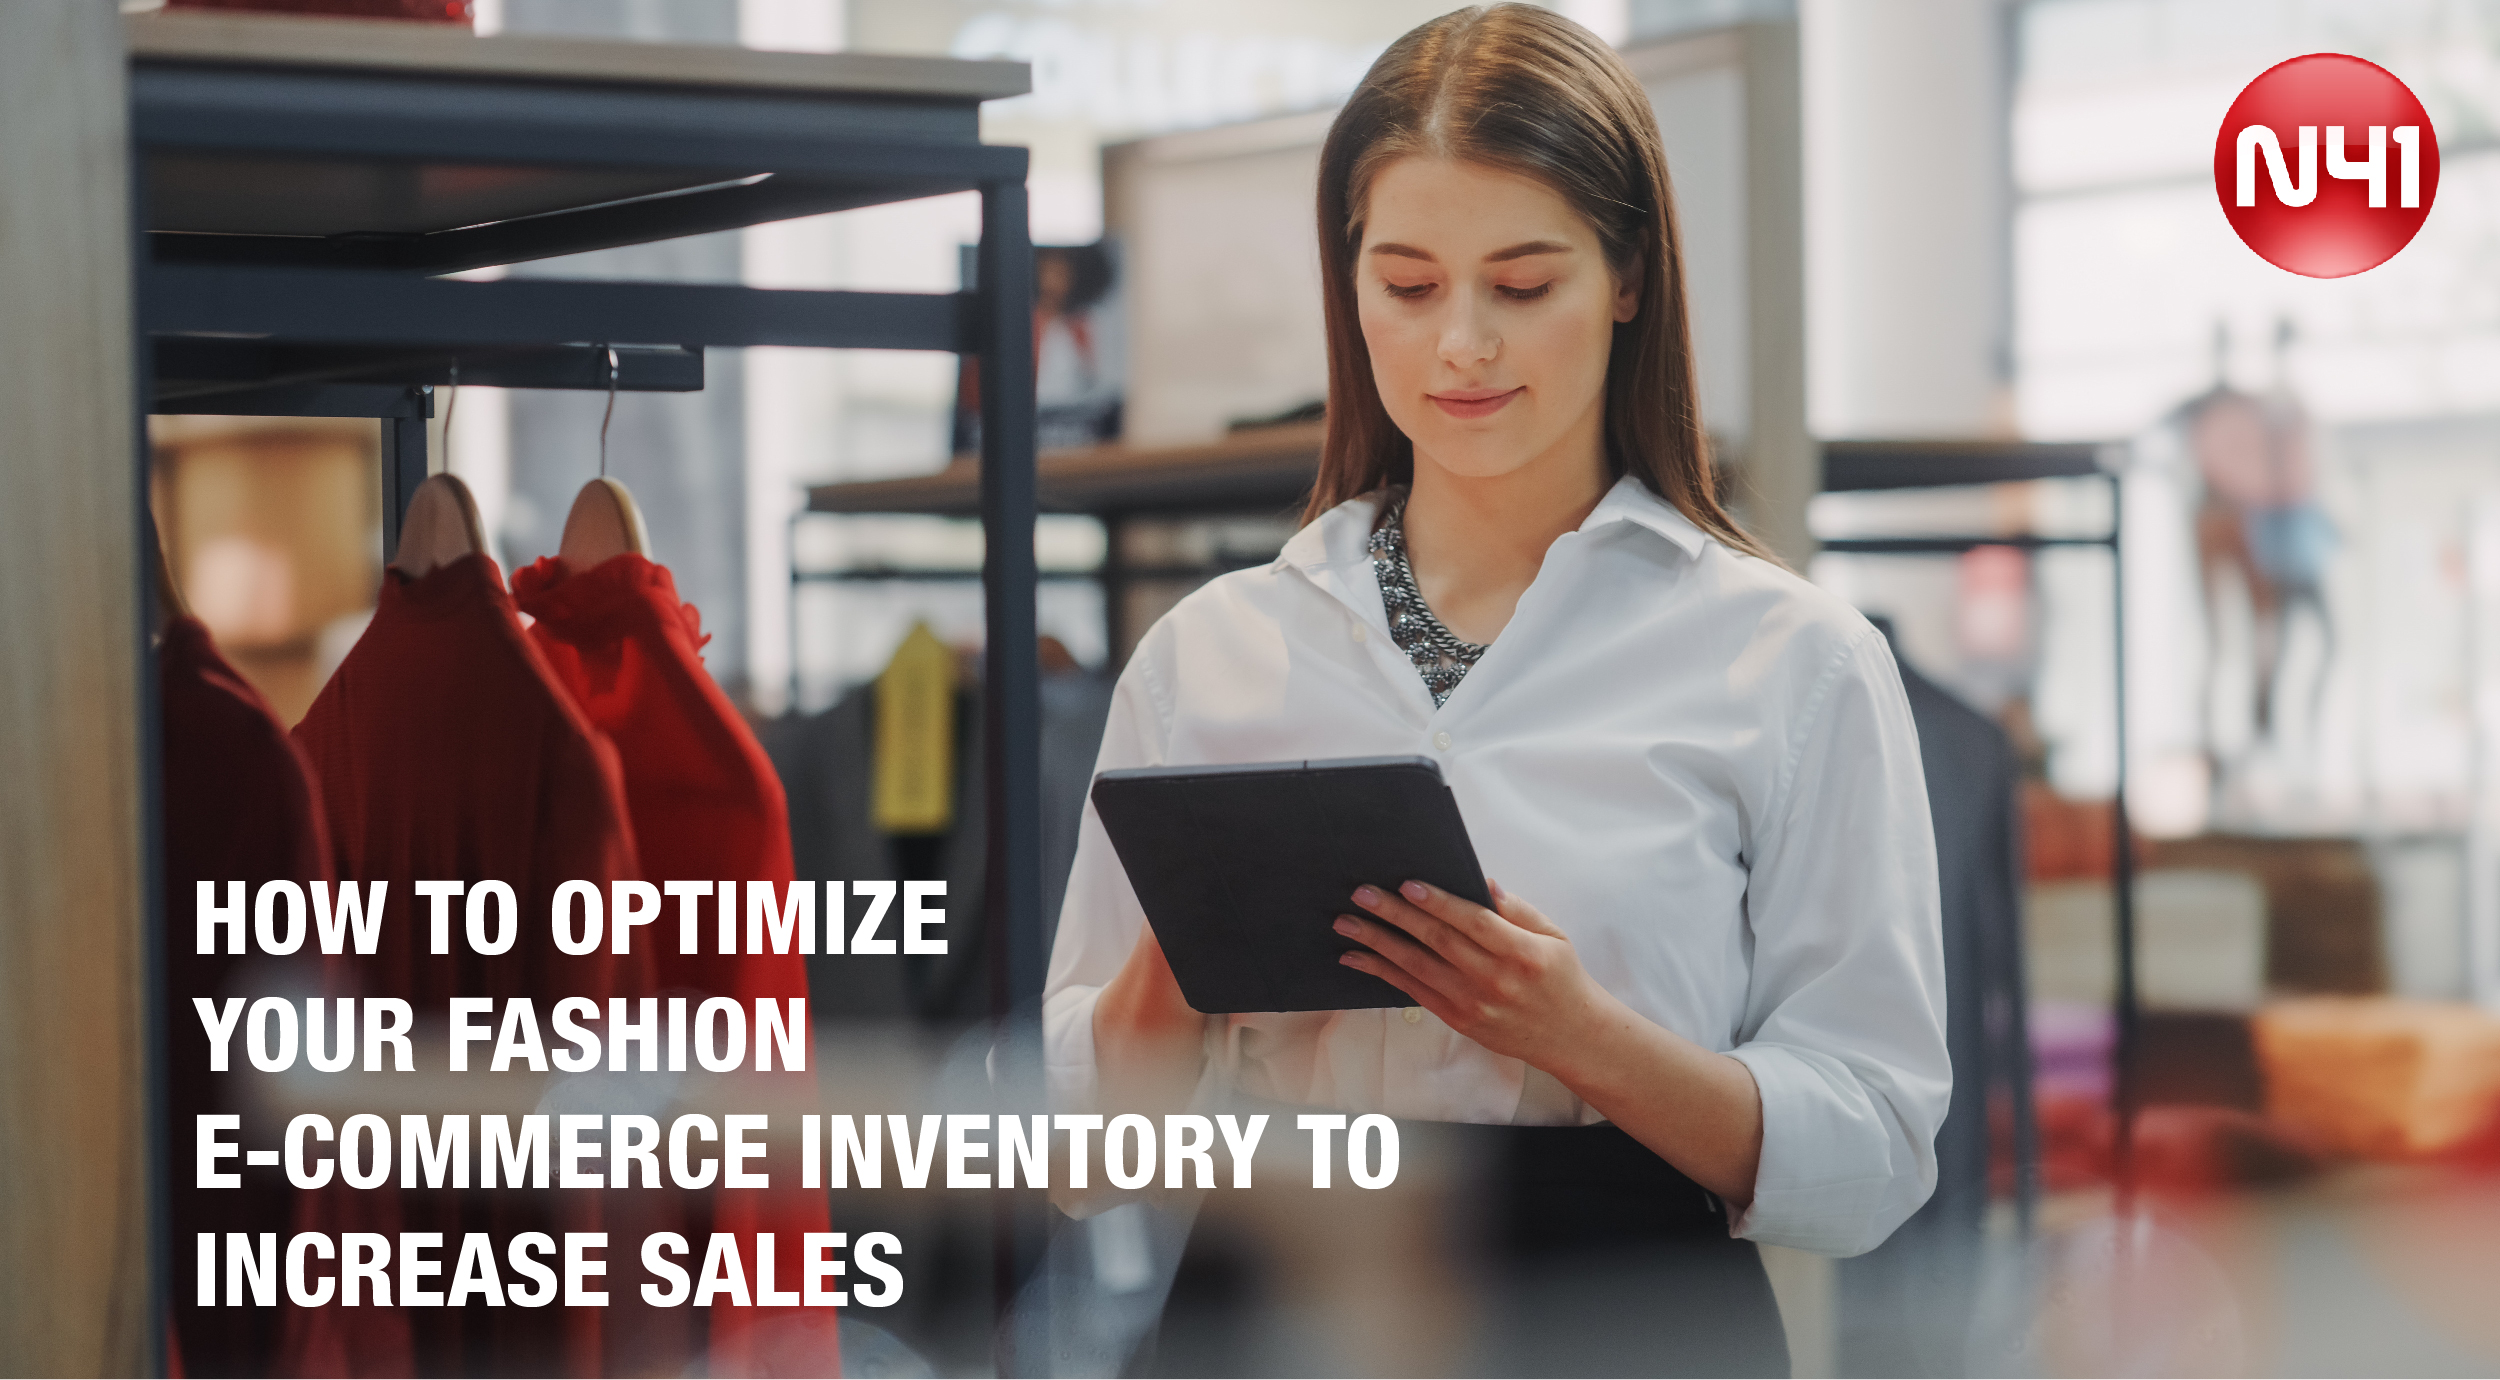 How To Optimize Your Fashion E-Commerce Inventory To Increase Sales